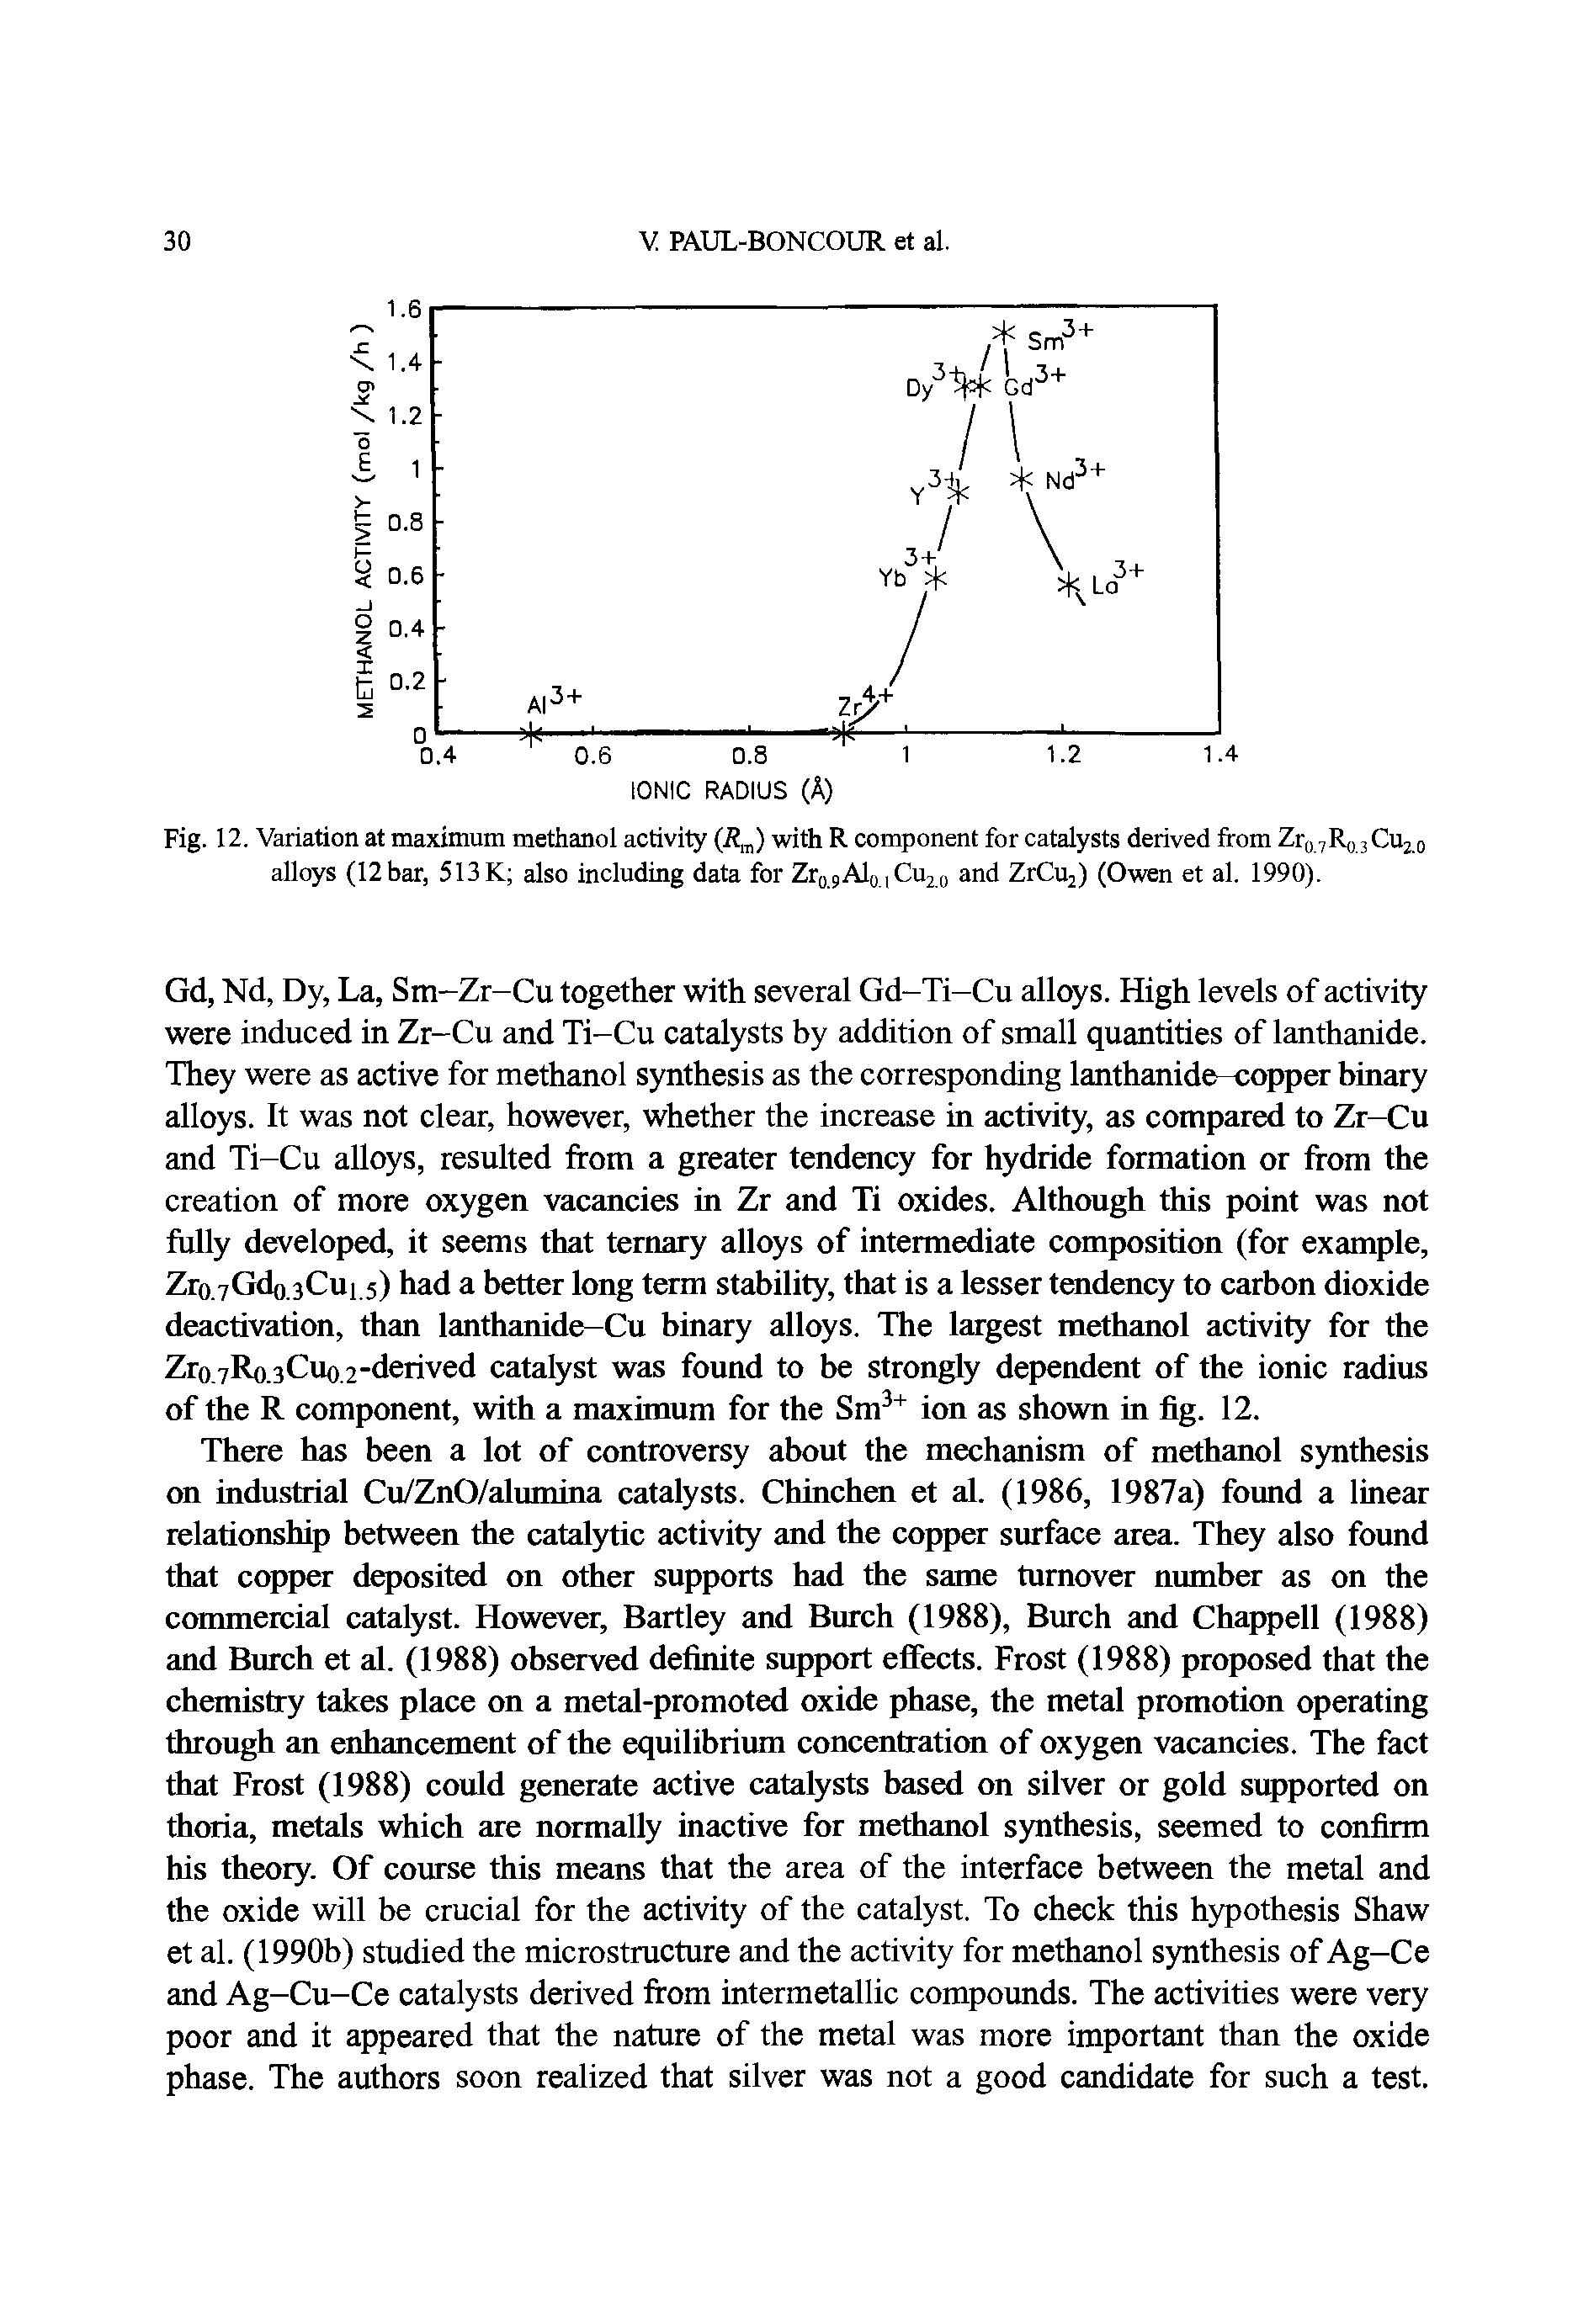 Fig. 12. Variation at maximum methanol activity (Rm) with R component for catalysts derived from Z R C o alloys (12bar, 513K also including data for Zr09Al0 Cu20 and ZrCu2) (Owen et al. 1990).